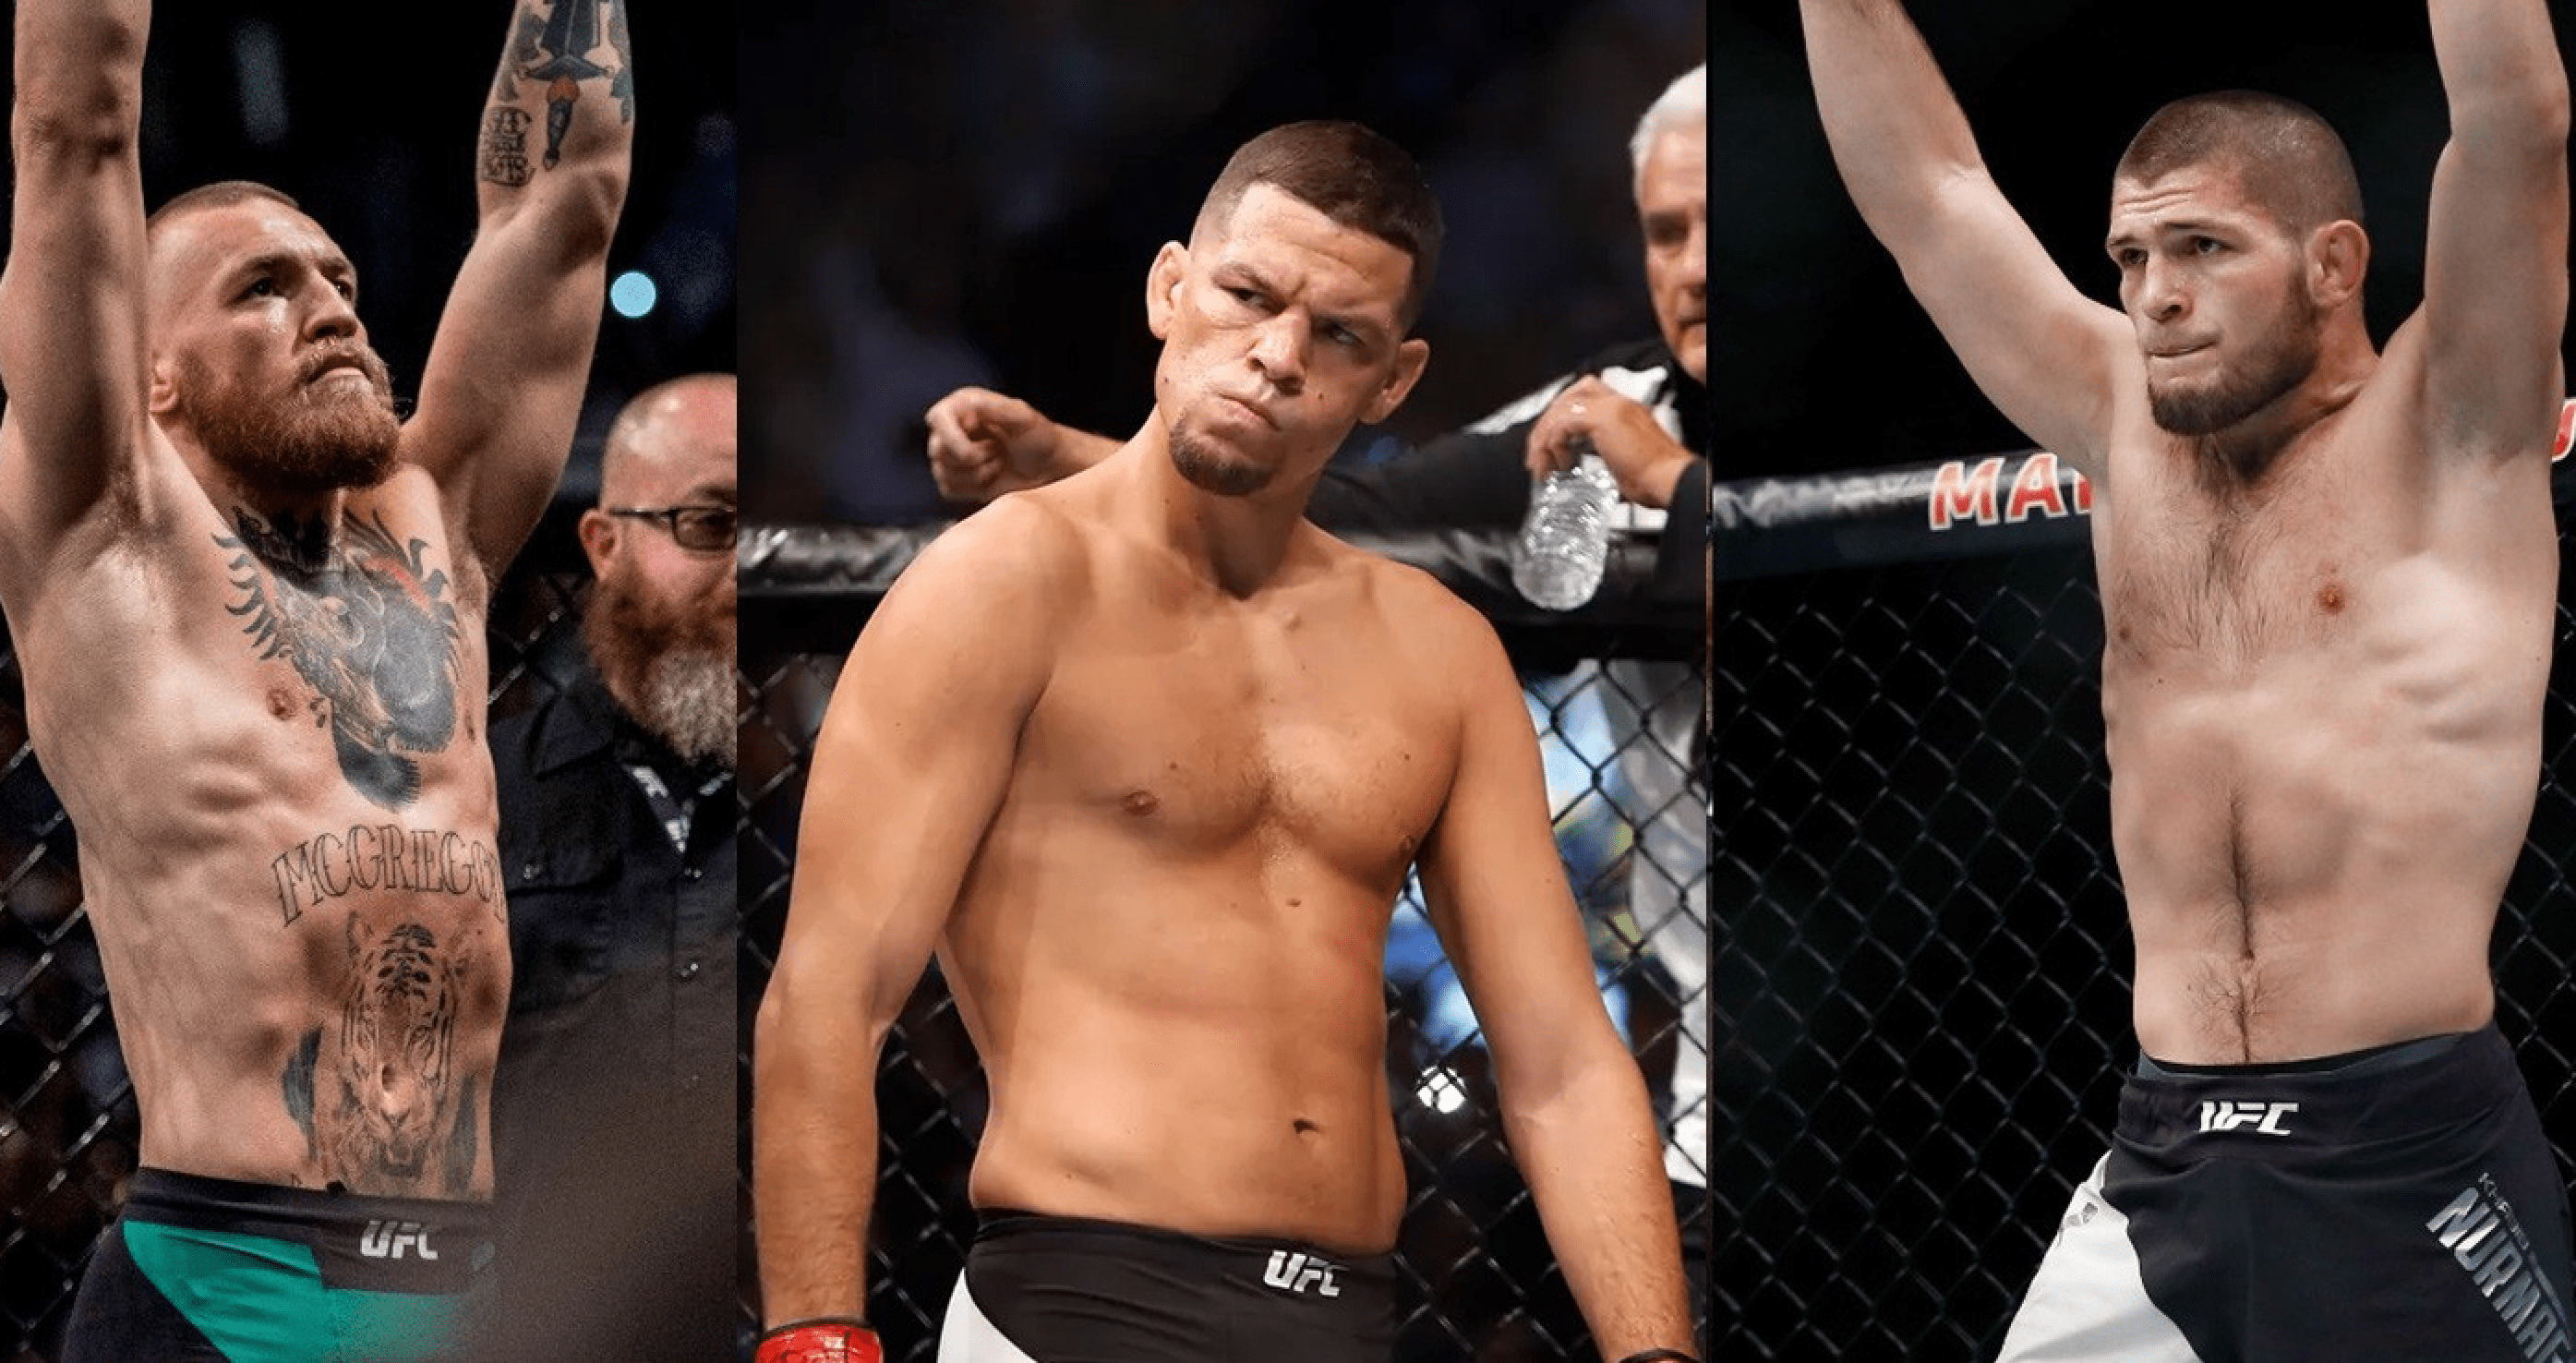 UFC: Conor McGregor Hits Out At Khabib, Comments On Nate Diaz Loss